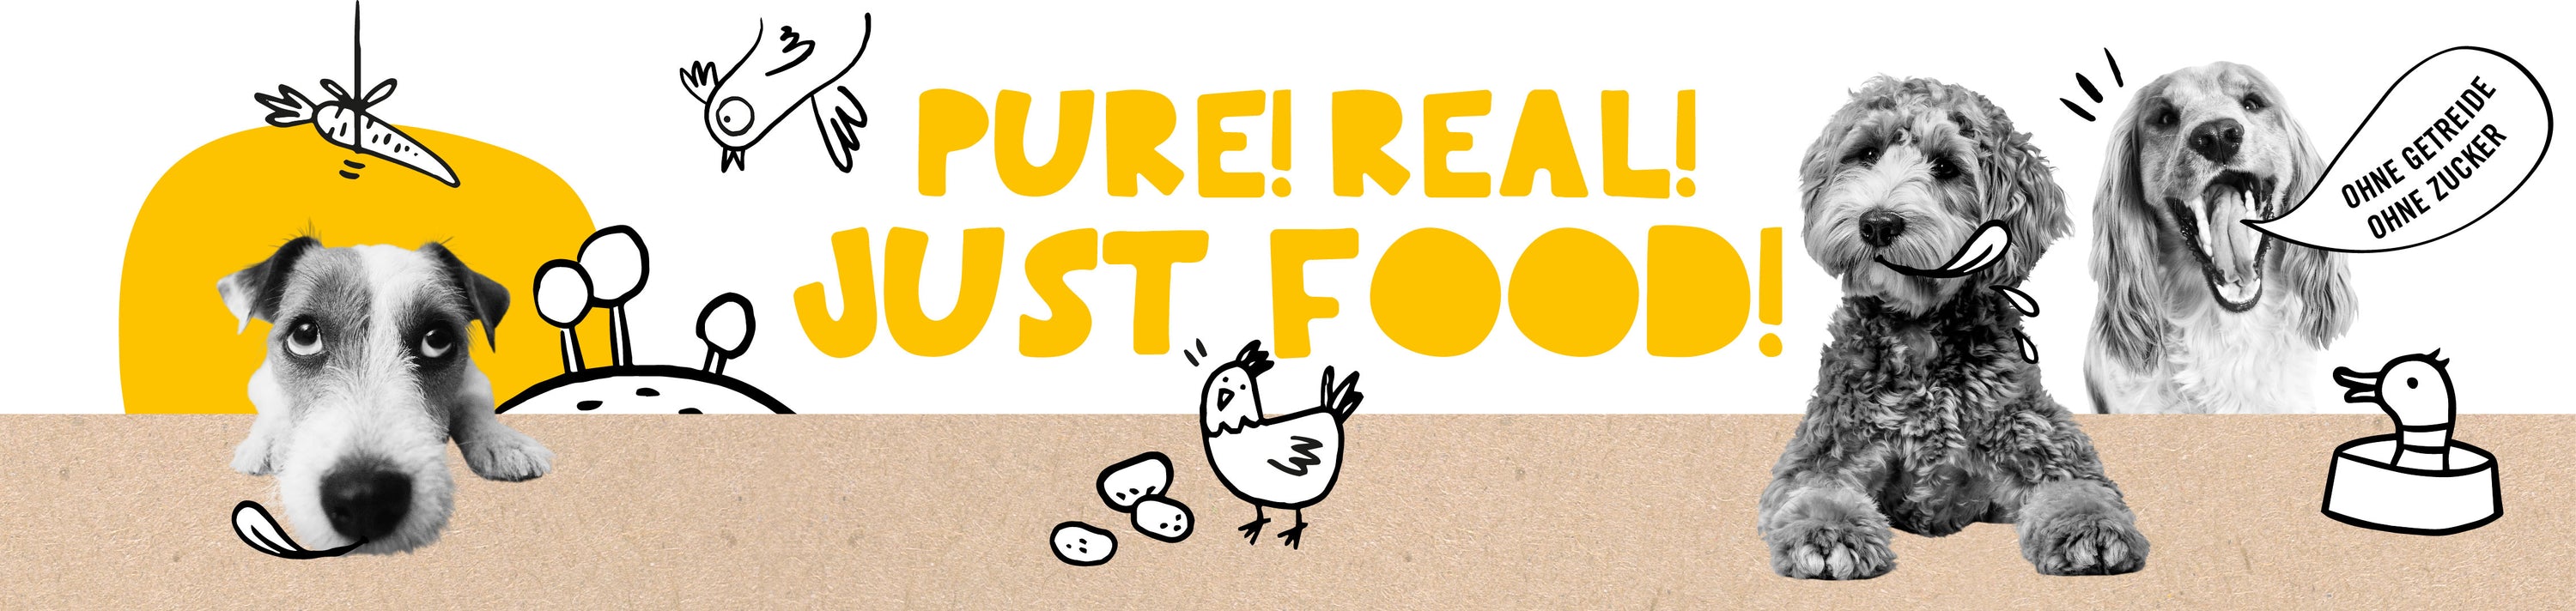 Banner Startseite Hundefutter: Pure! Real! Just Food!